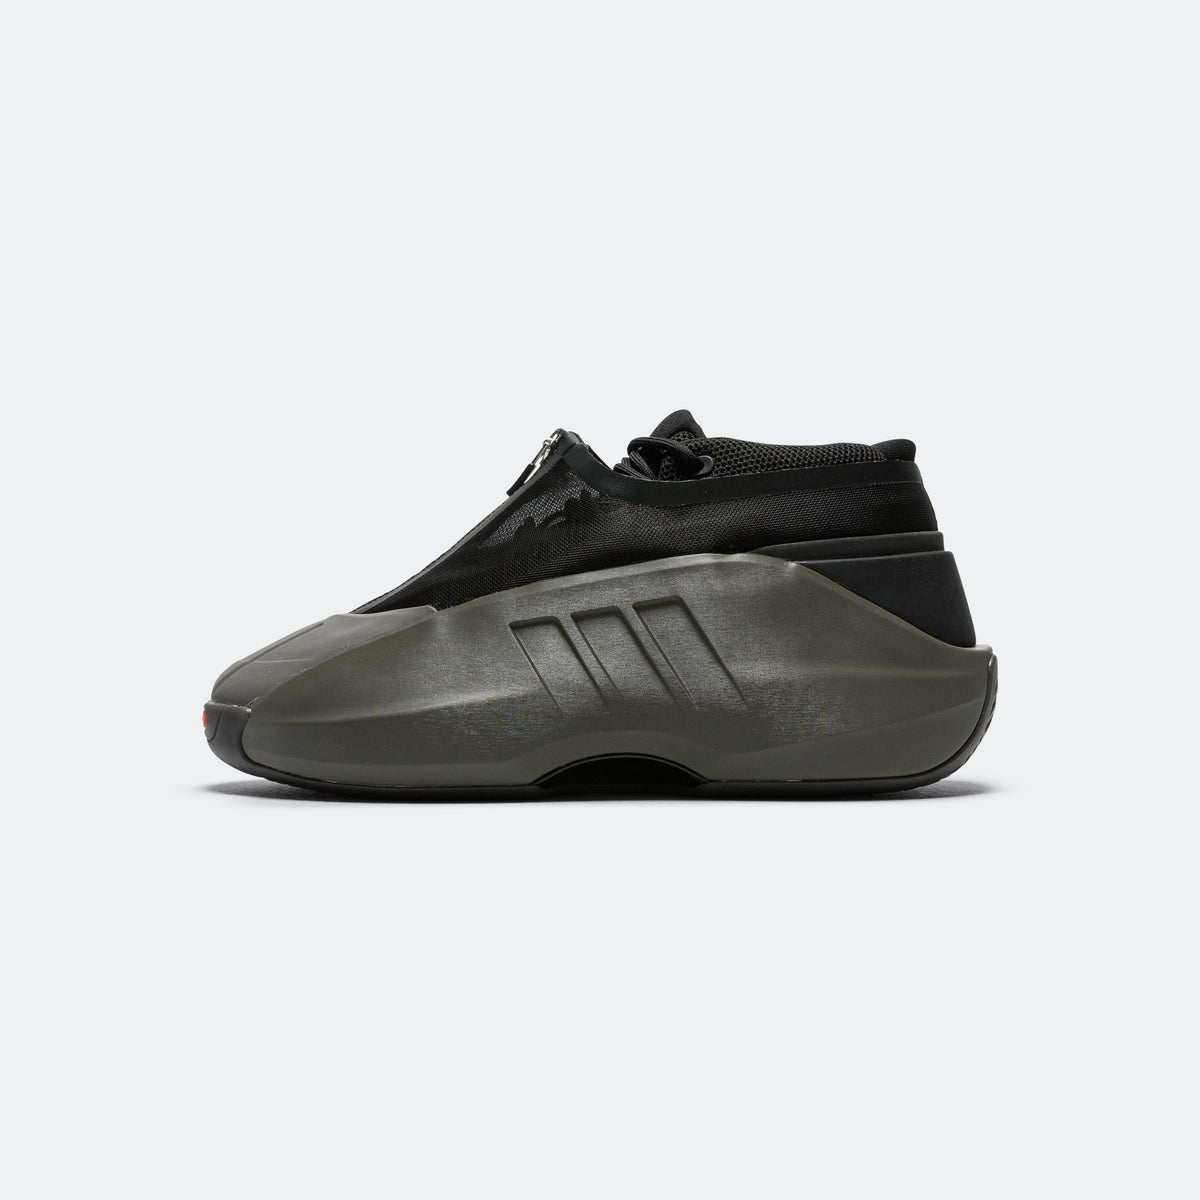 adidas Crazy IIINFINITY - Charcoal/Core Black-Solar Red | UP THERE